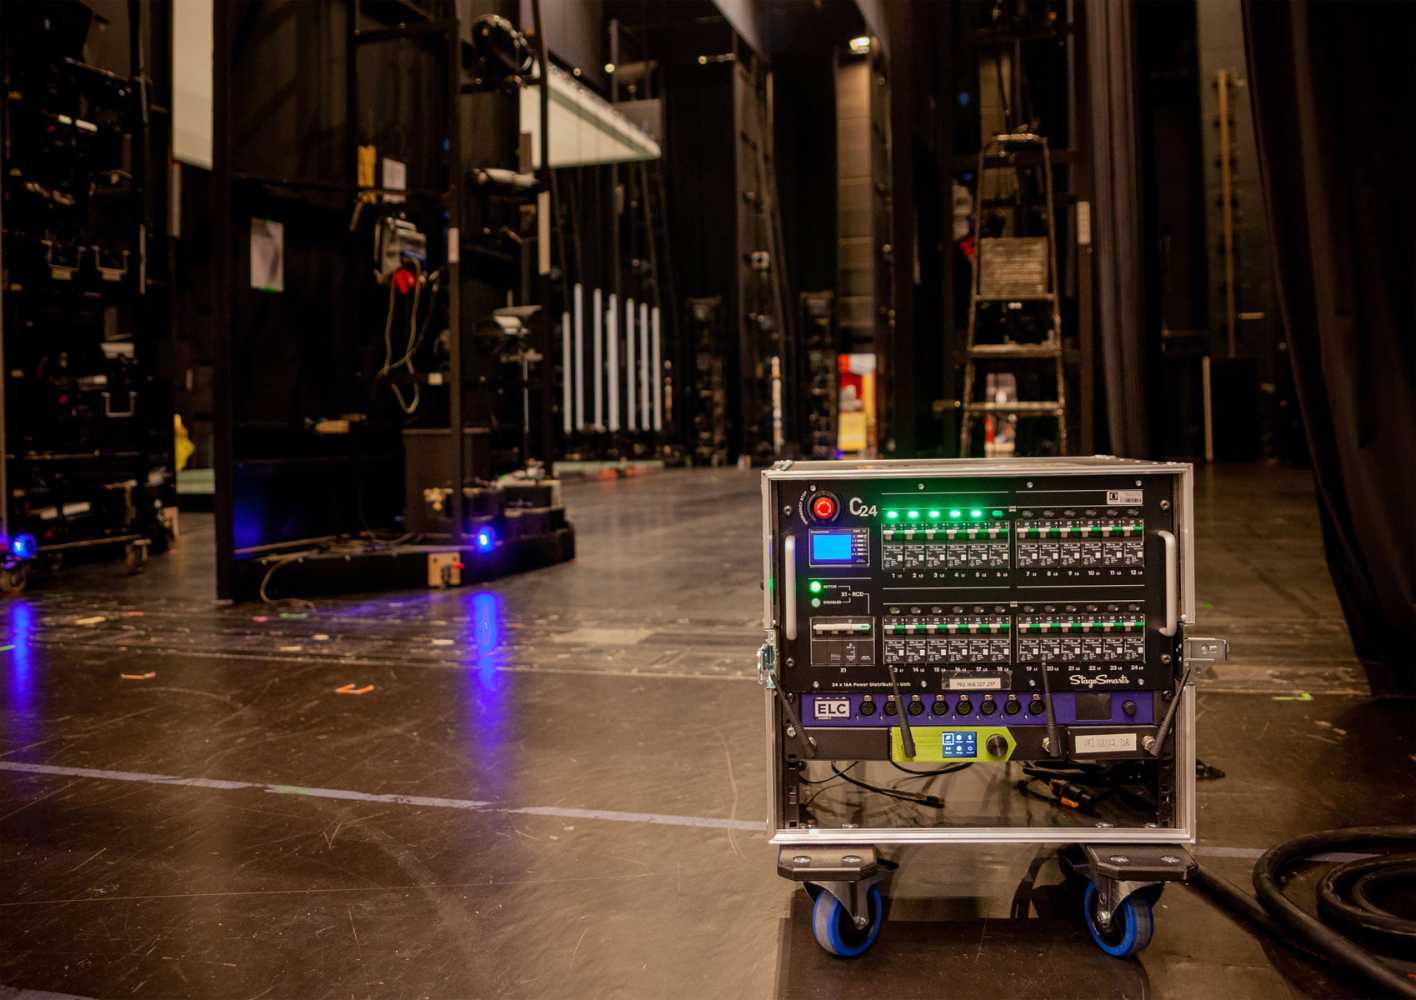 The StageSmarts C24 is a 24-channel power distribution unit